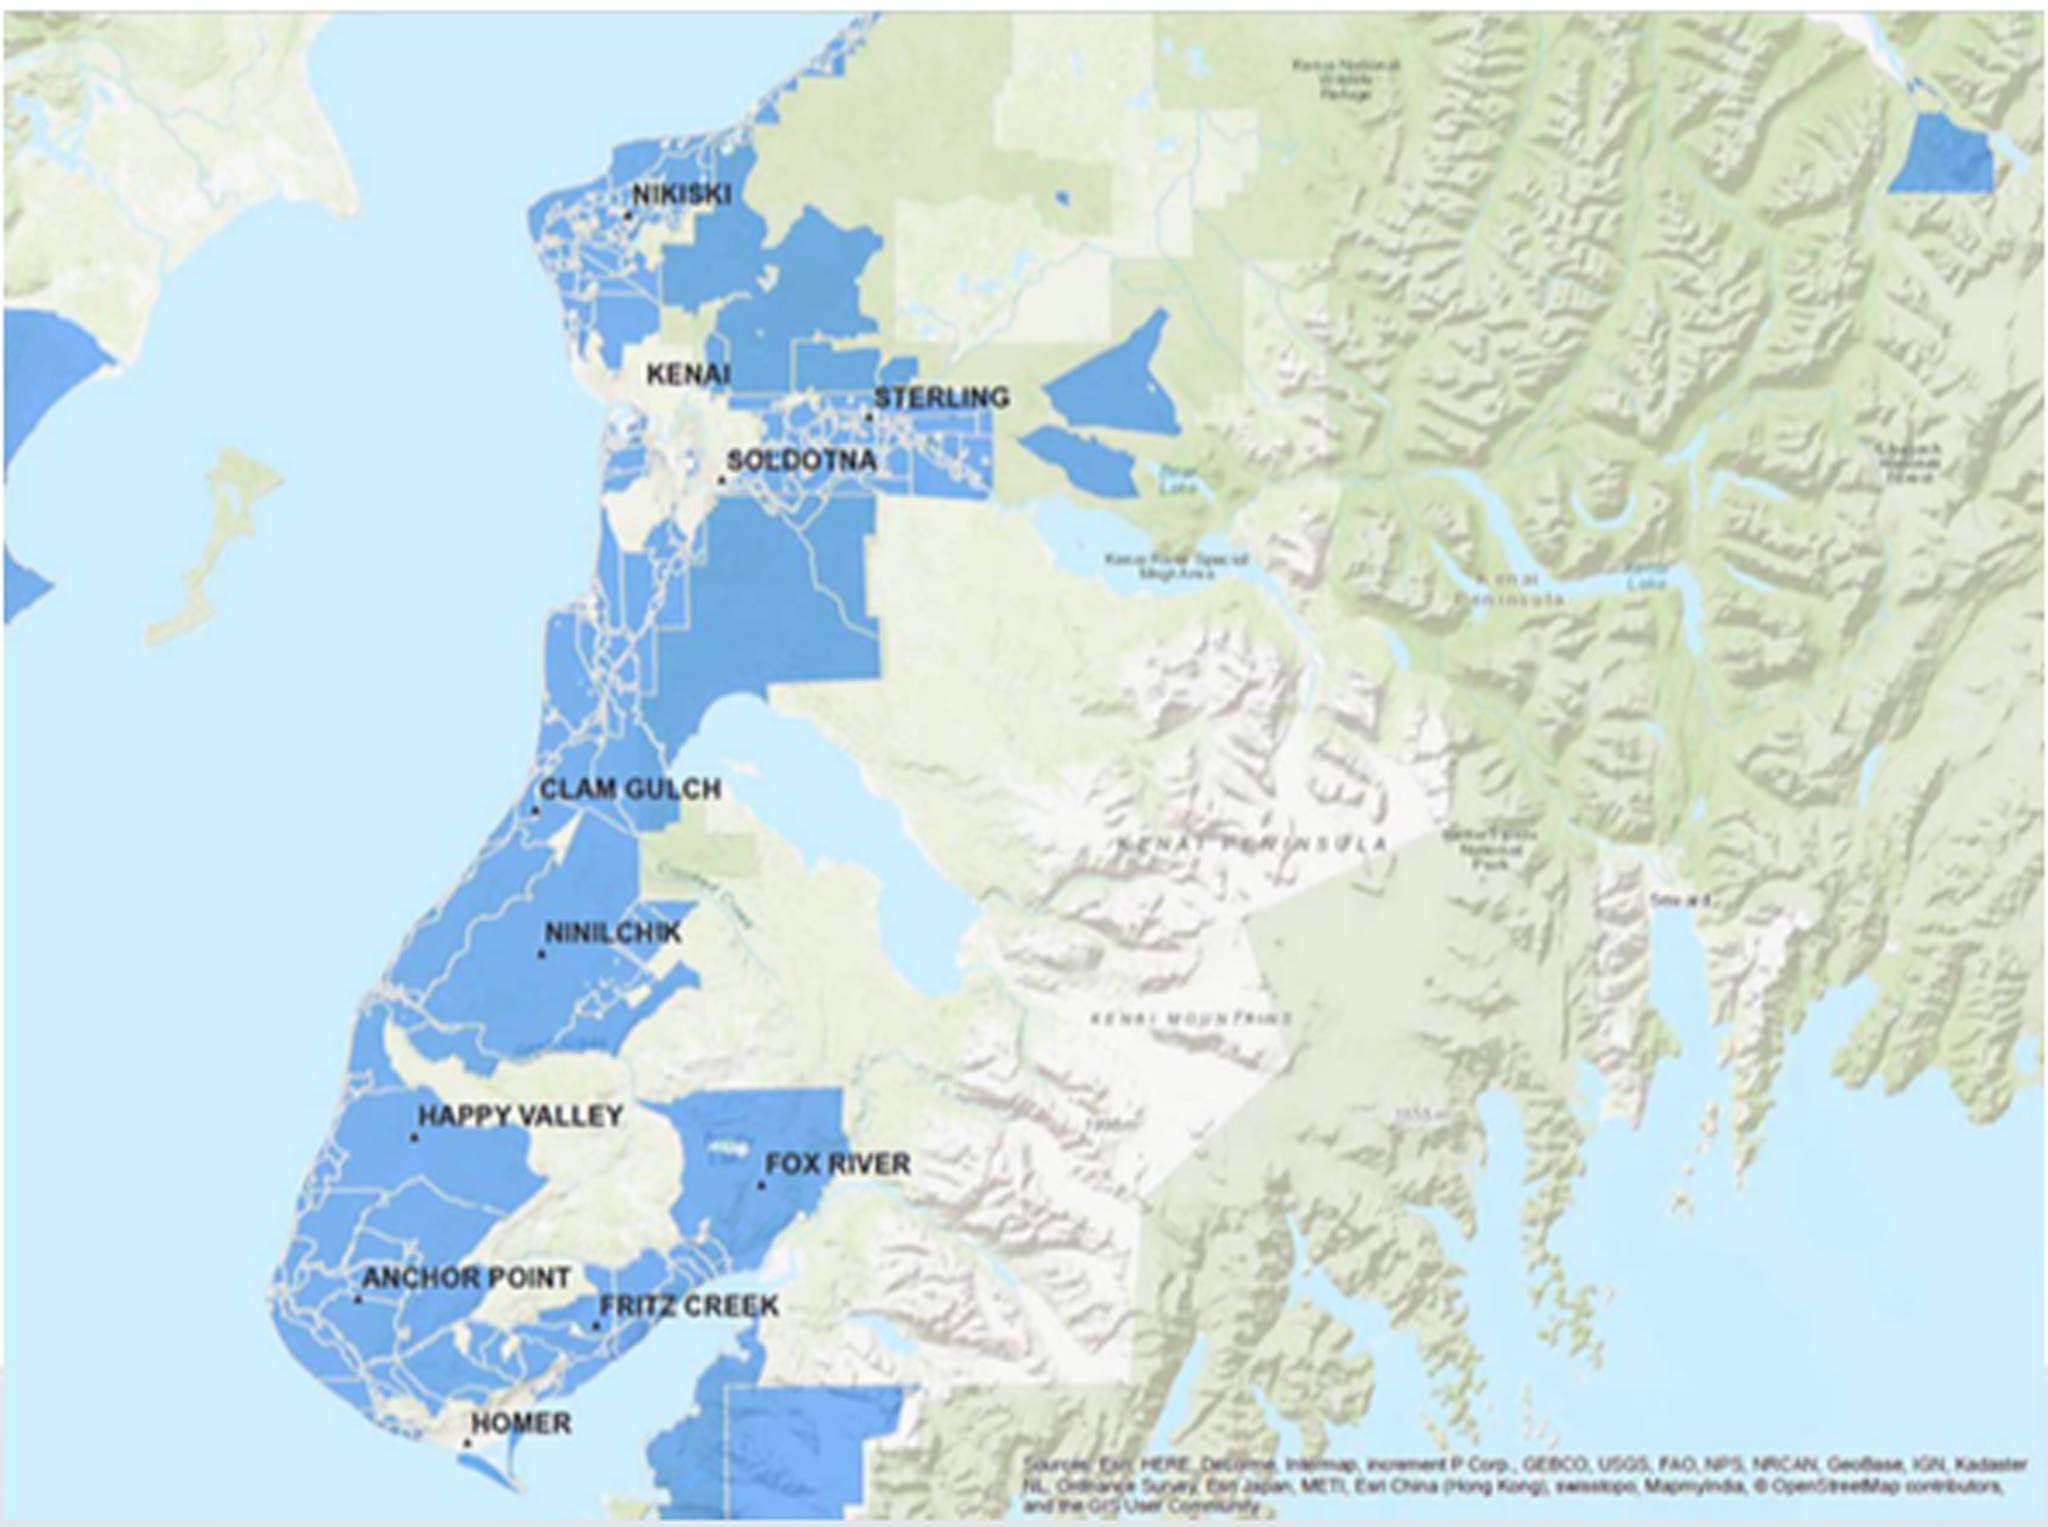 This map, taken from Alaska Communications’ presentation to the Kenai Peninsula Borough Assembly on Tuesday, Aug. 15, 2017, shows the areas eligible for broadband expansion with the funding Alaska Communications received from the Federal Communications Commission. The company plans to expand its broadband internet services on the Kenai Peninsula in stages from 2018–2025. (Courtesy Alaska Communications)